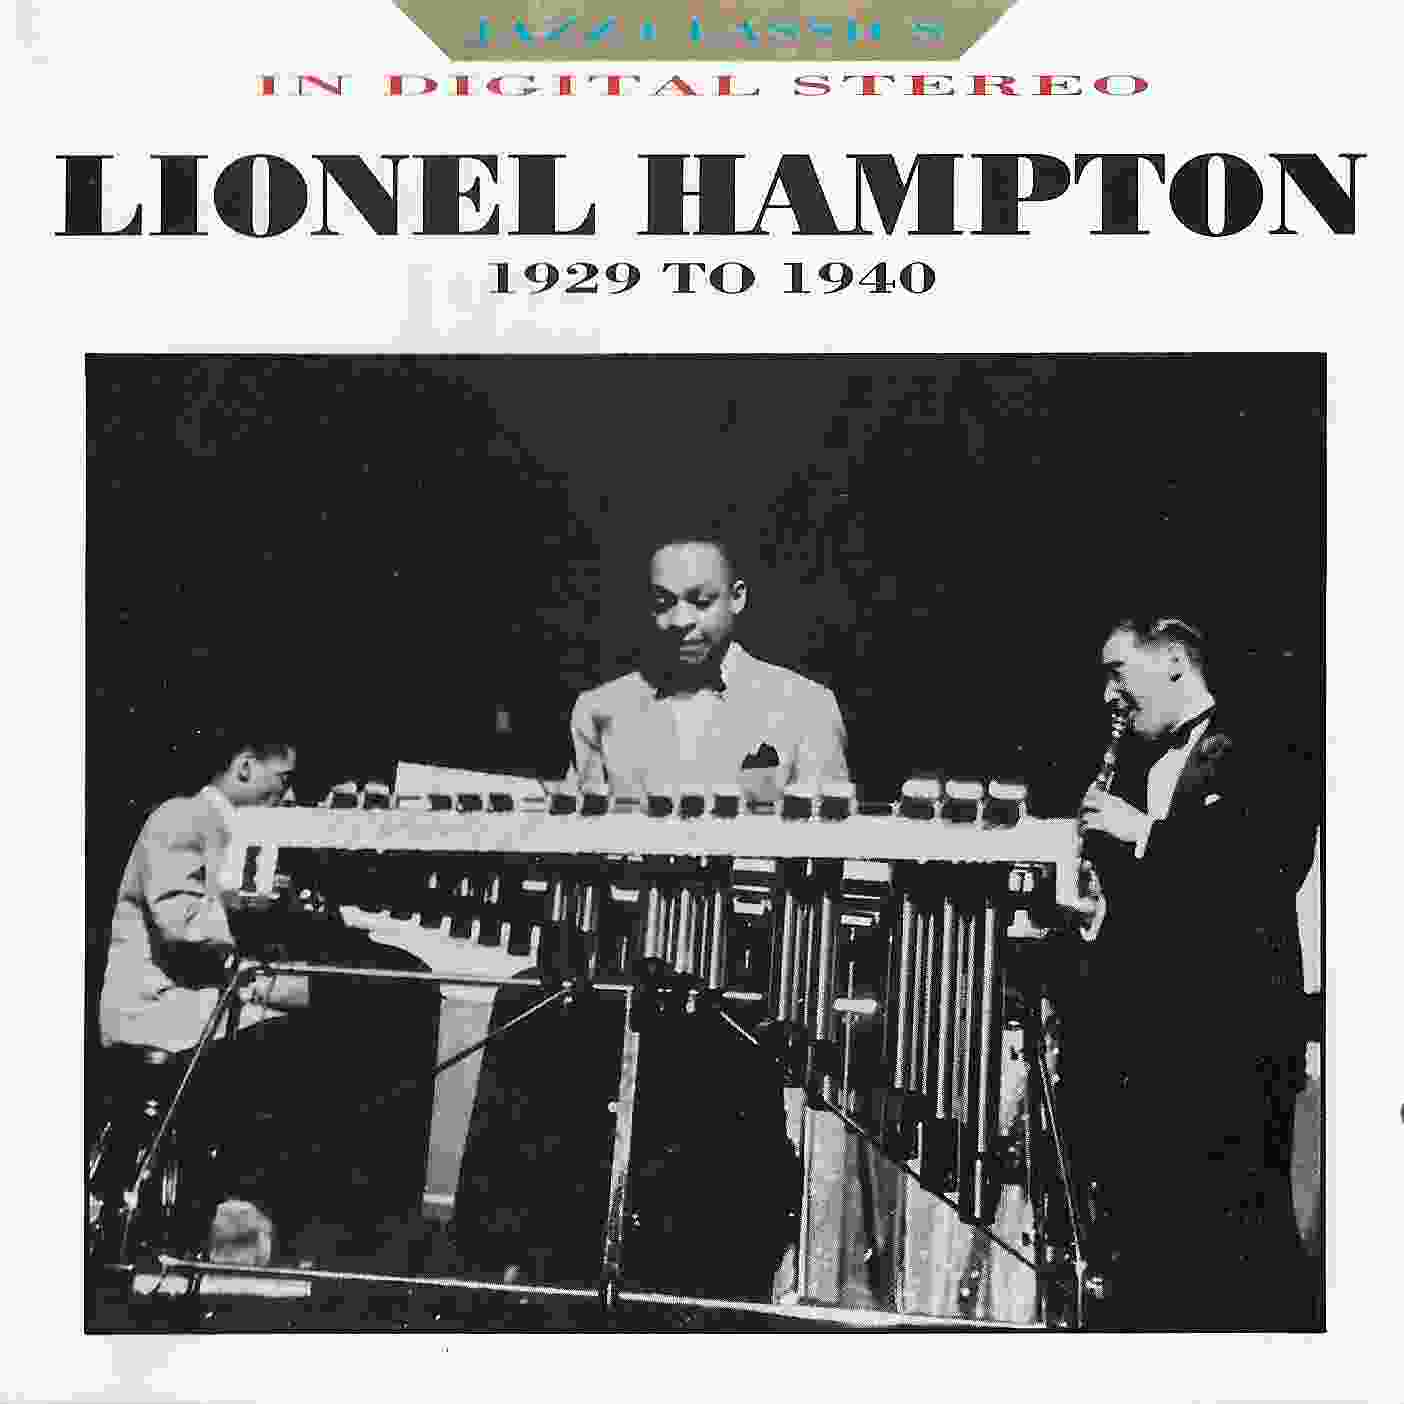 Picture of Lionel Hampton 1929 - 1940 by artist Lionel Hampton from the BBC cds - Records and Tapes library